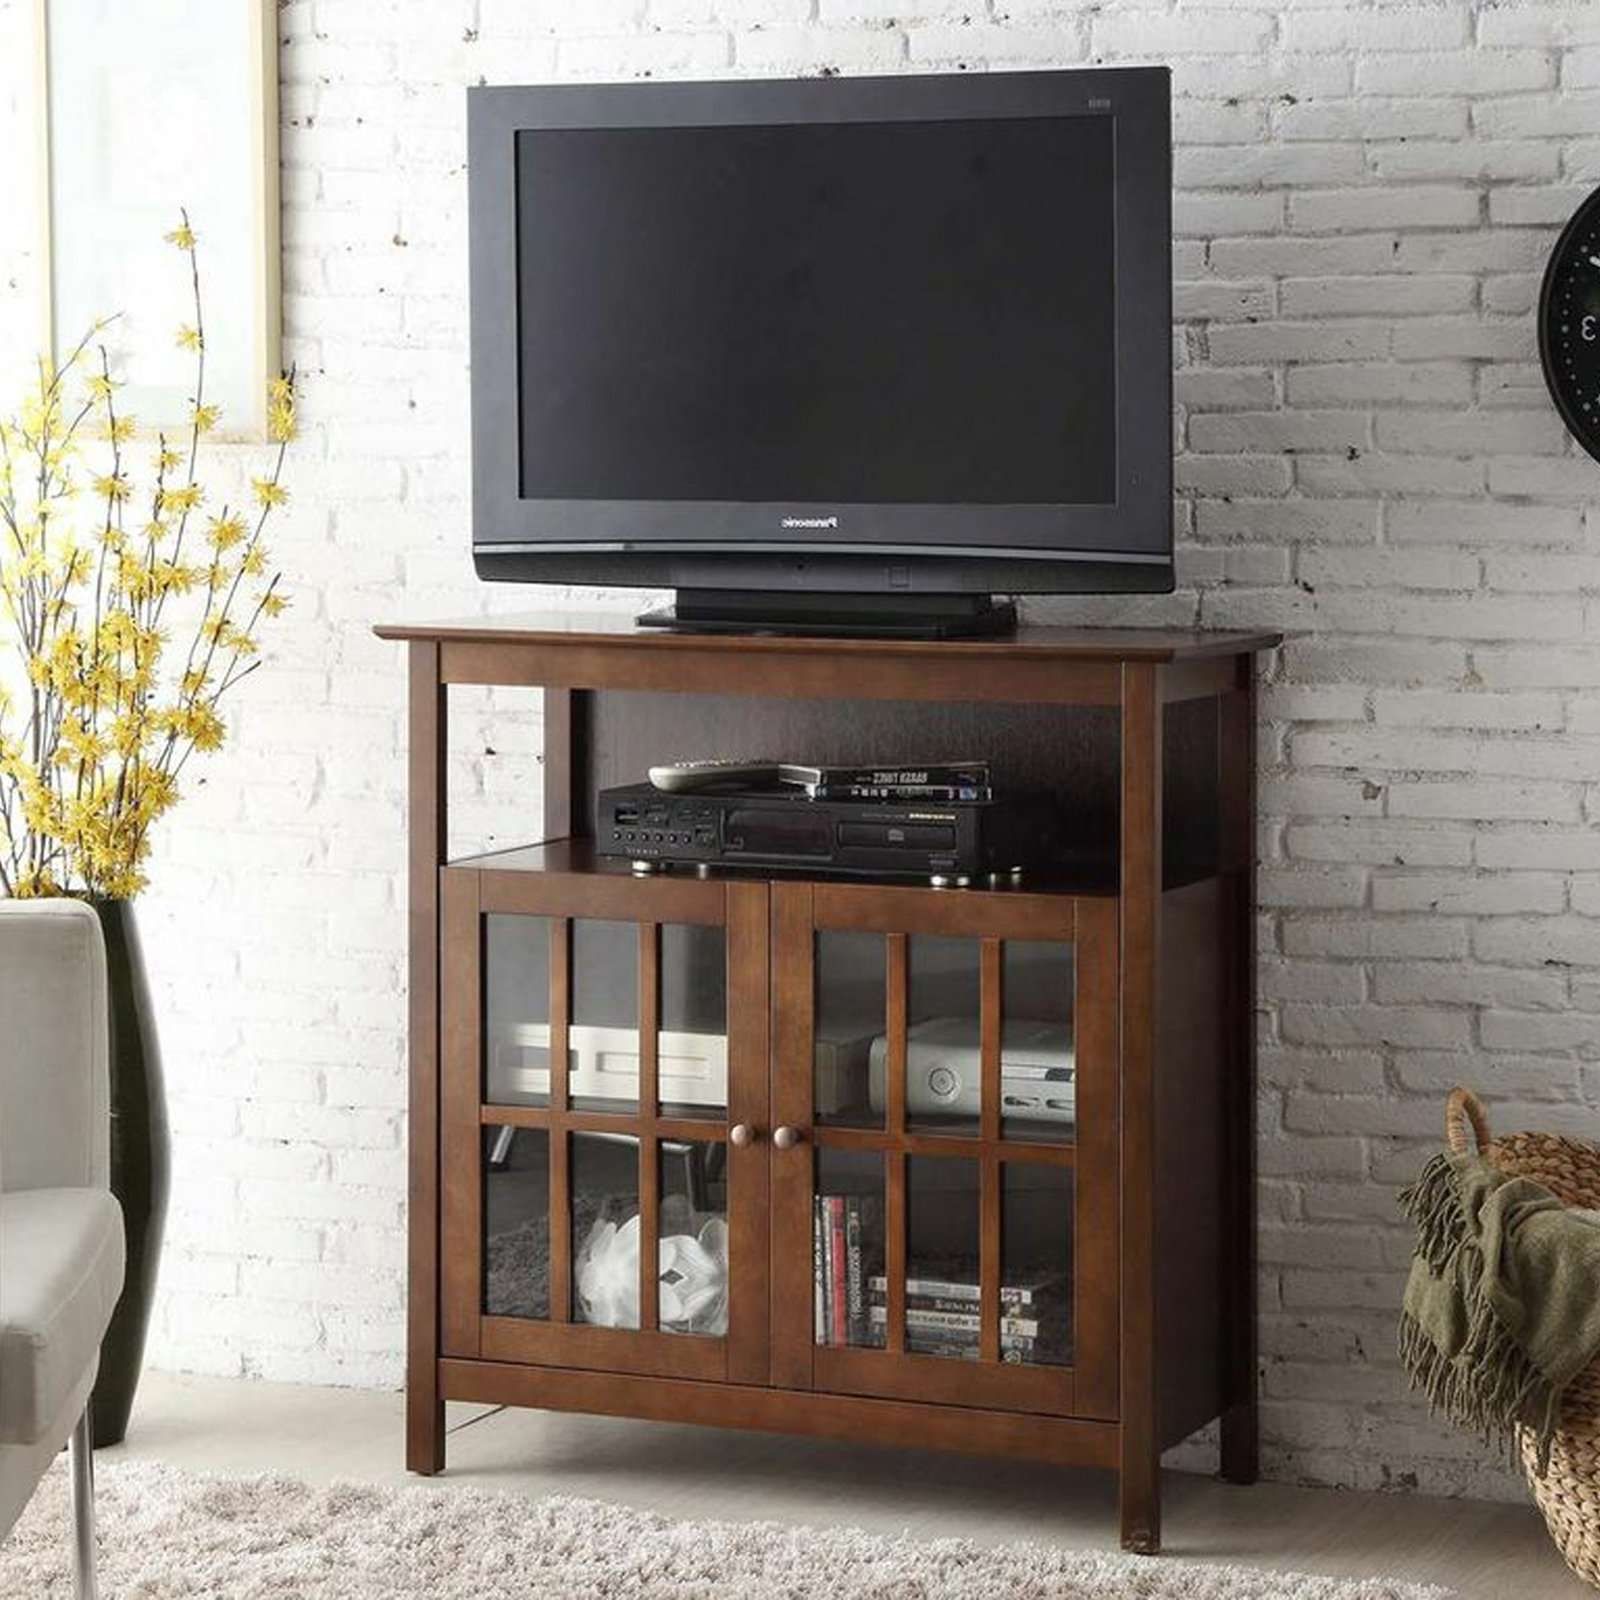 Tv Stand 40 Inches Wide Tags : 31 Striking Tv Stand 40 Inch With Regard To Tv Stands 40 Inches Wide (View 1 of 15)